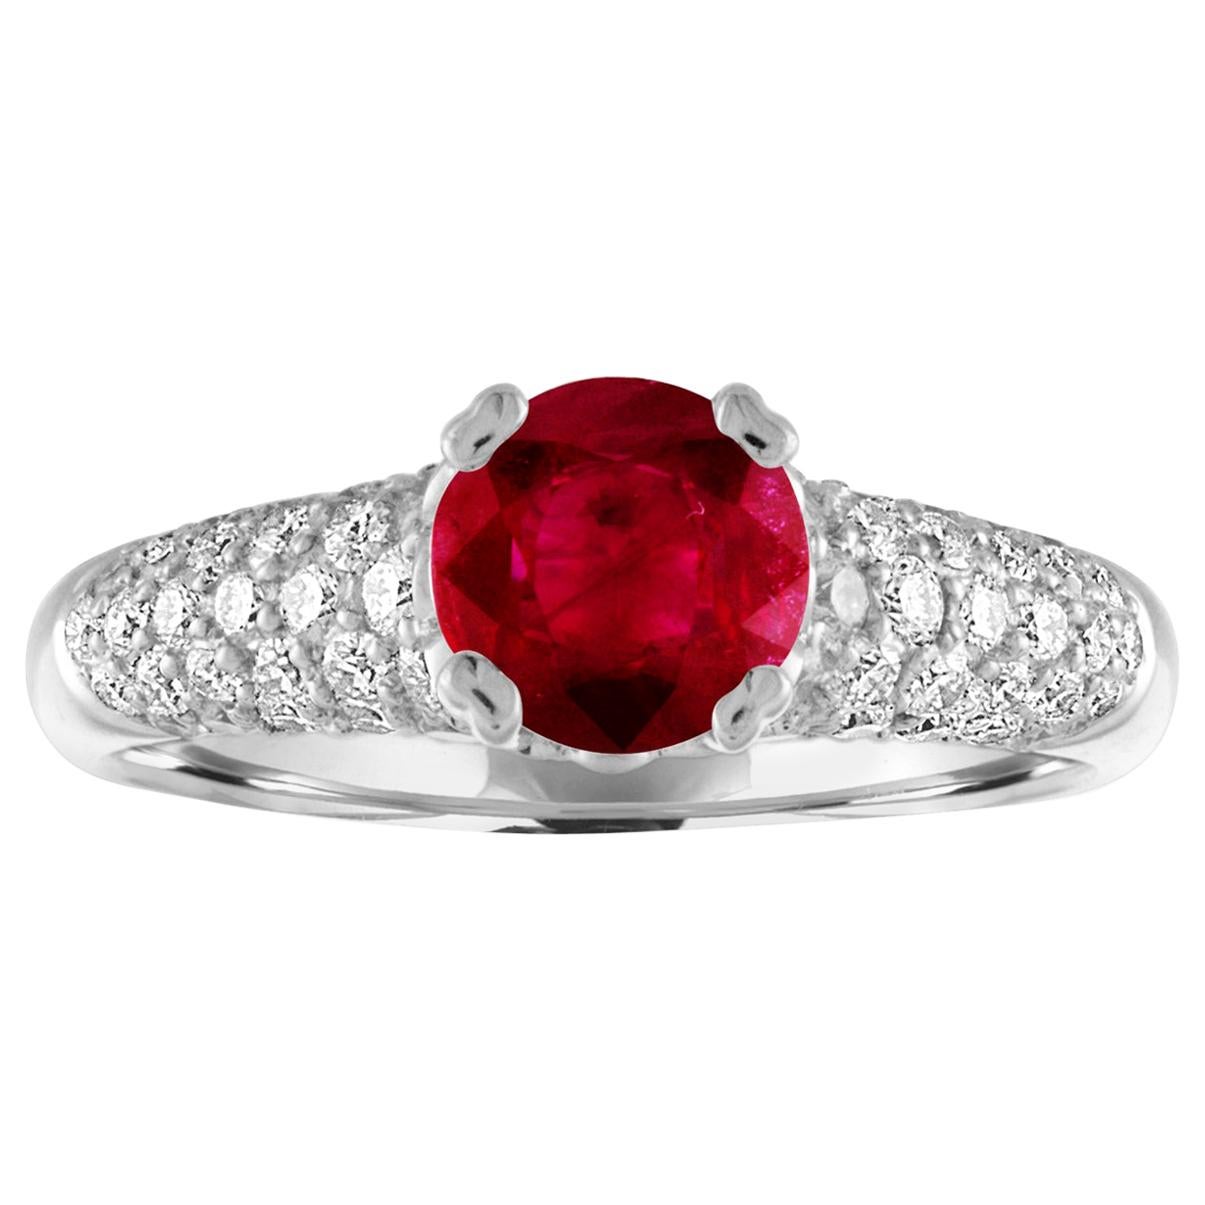 AGL Certified 1.14 Carat Round Ruby Diamond Gold Pave Ring